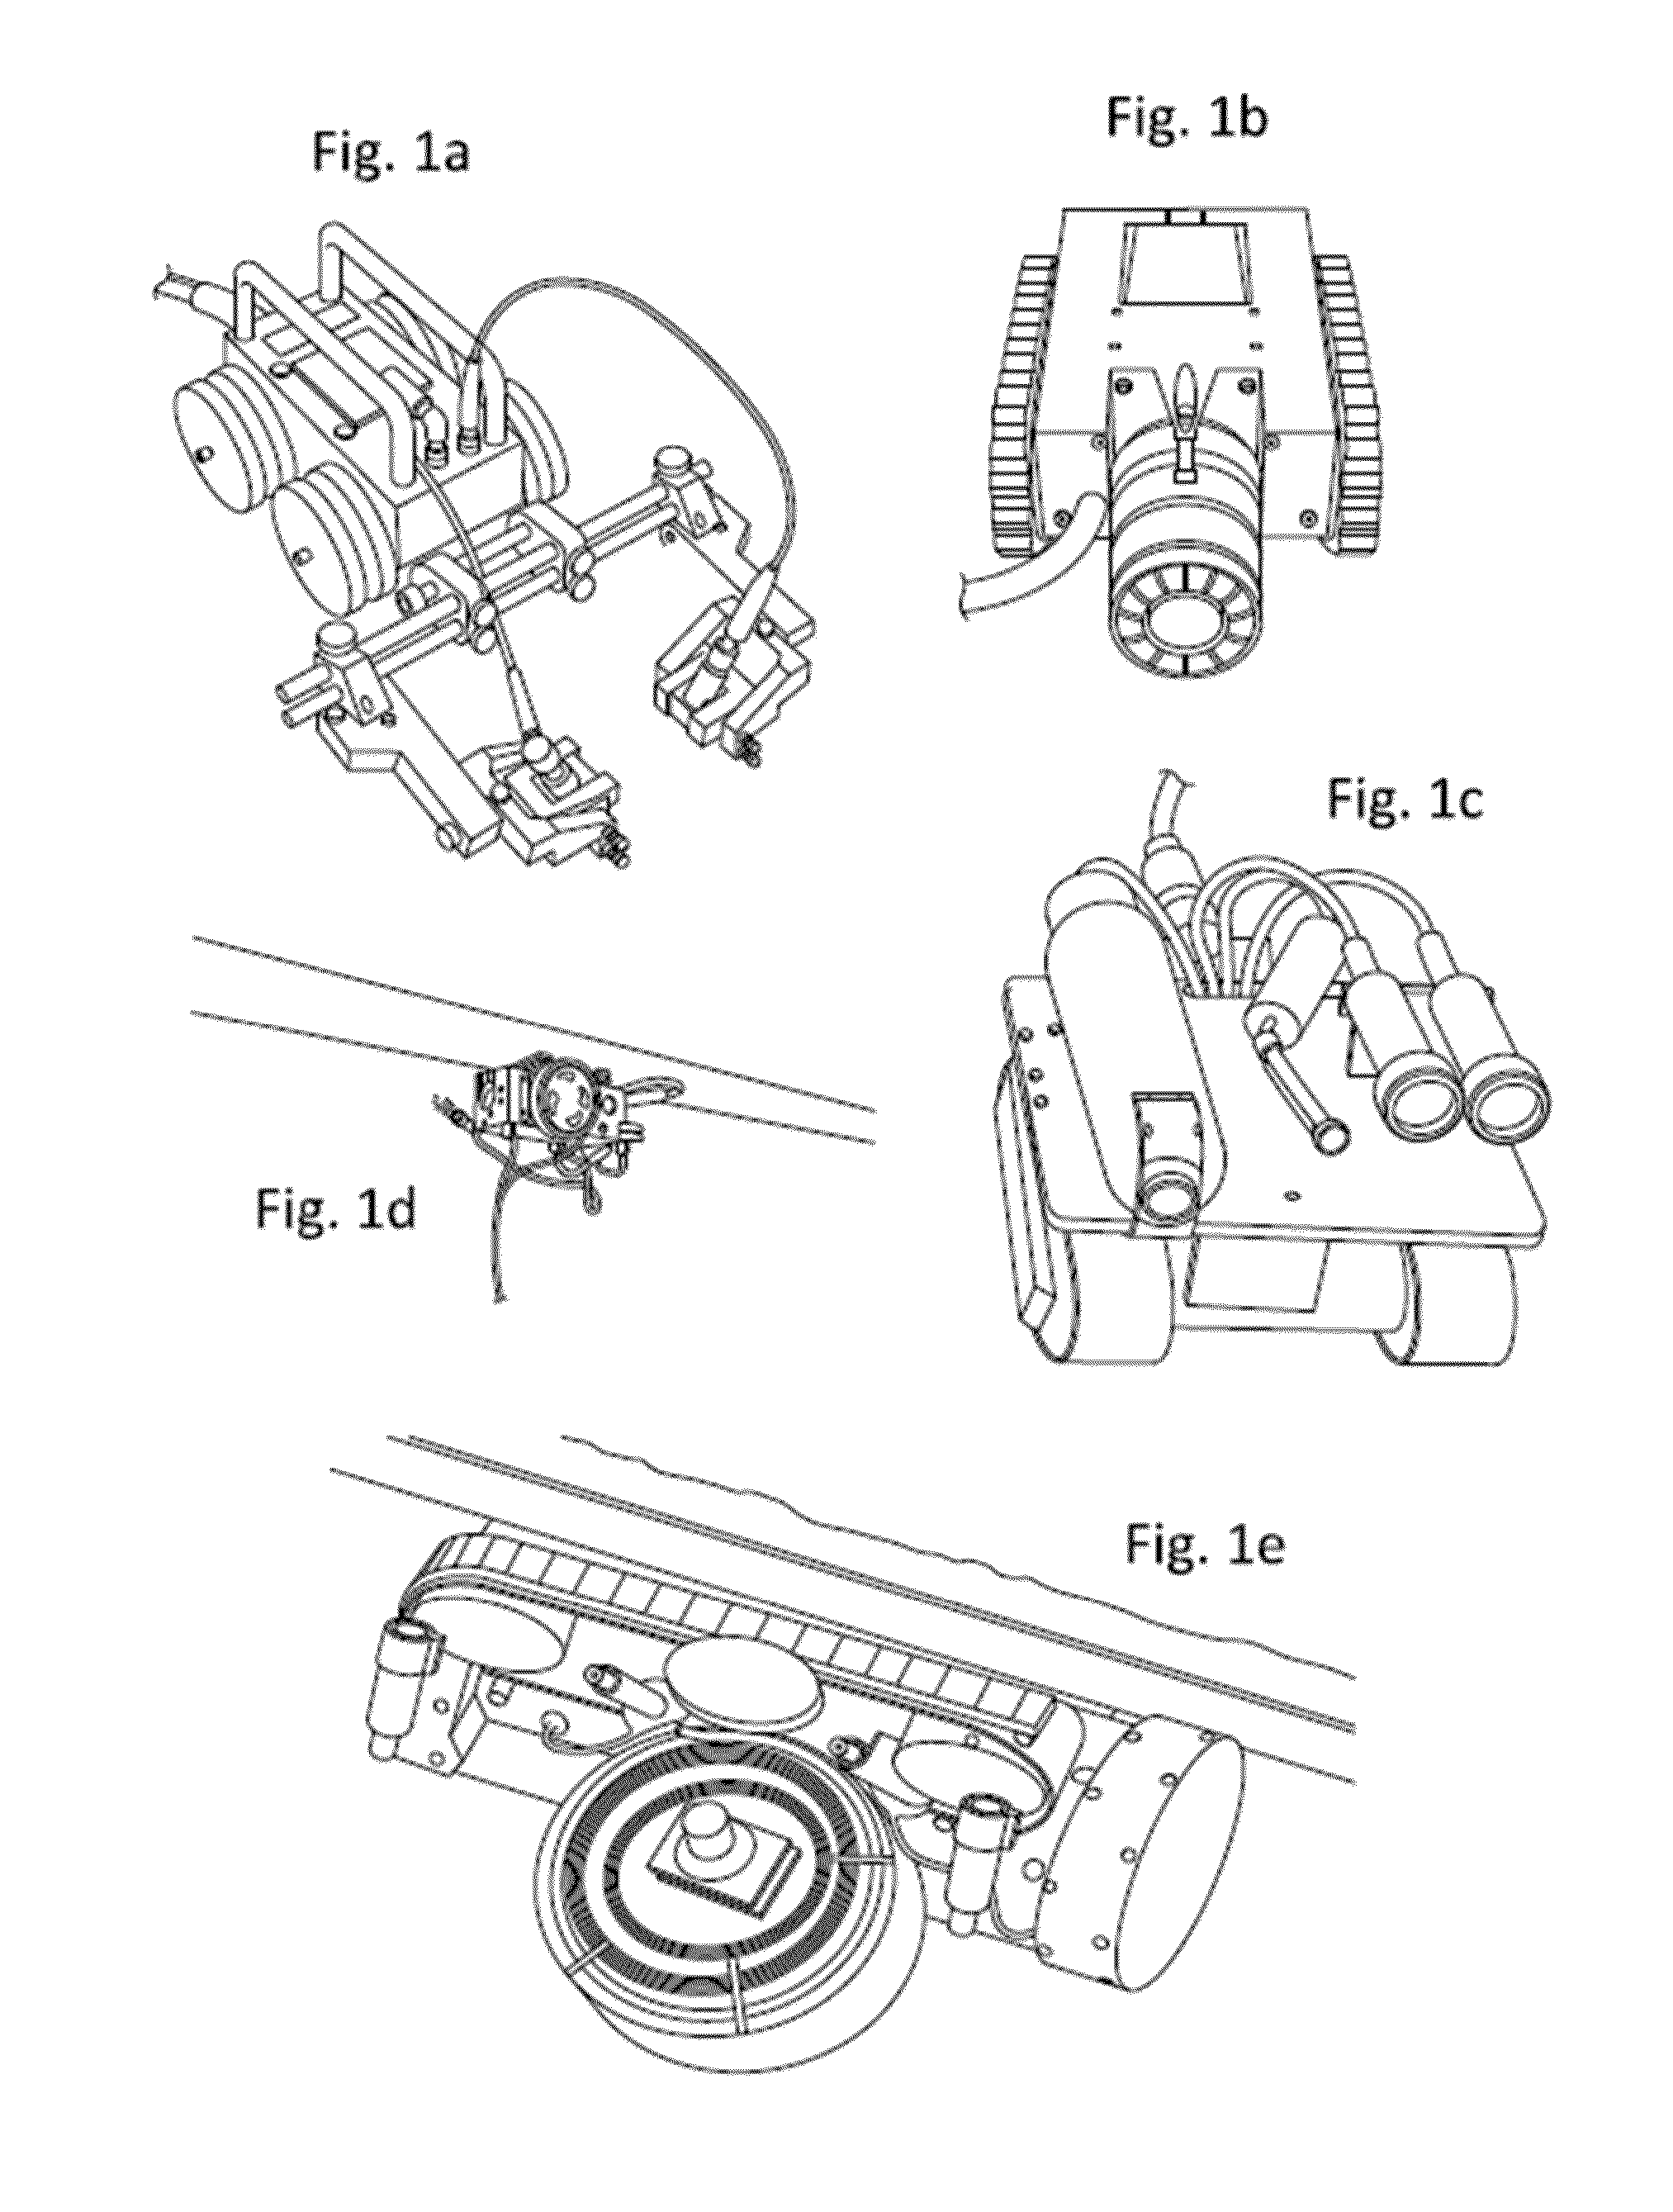 Mobile Operations Chassis with Controlled Magnetic Attraction to Ferrous Surfaces